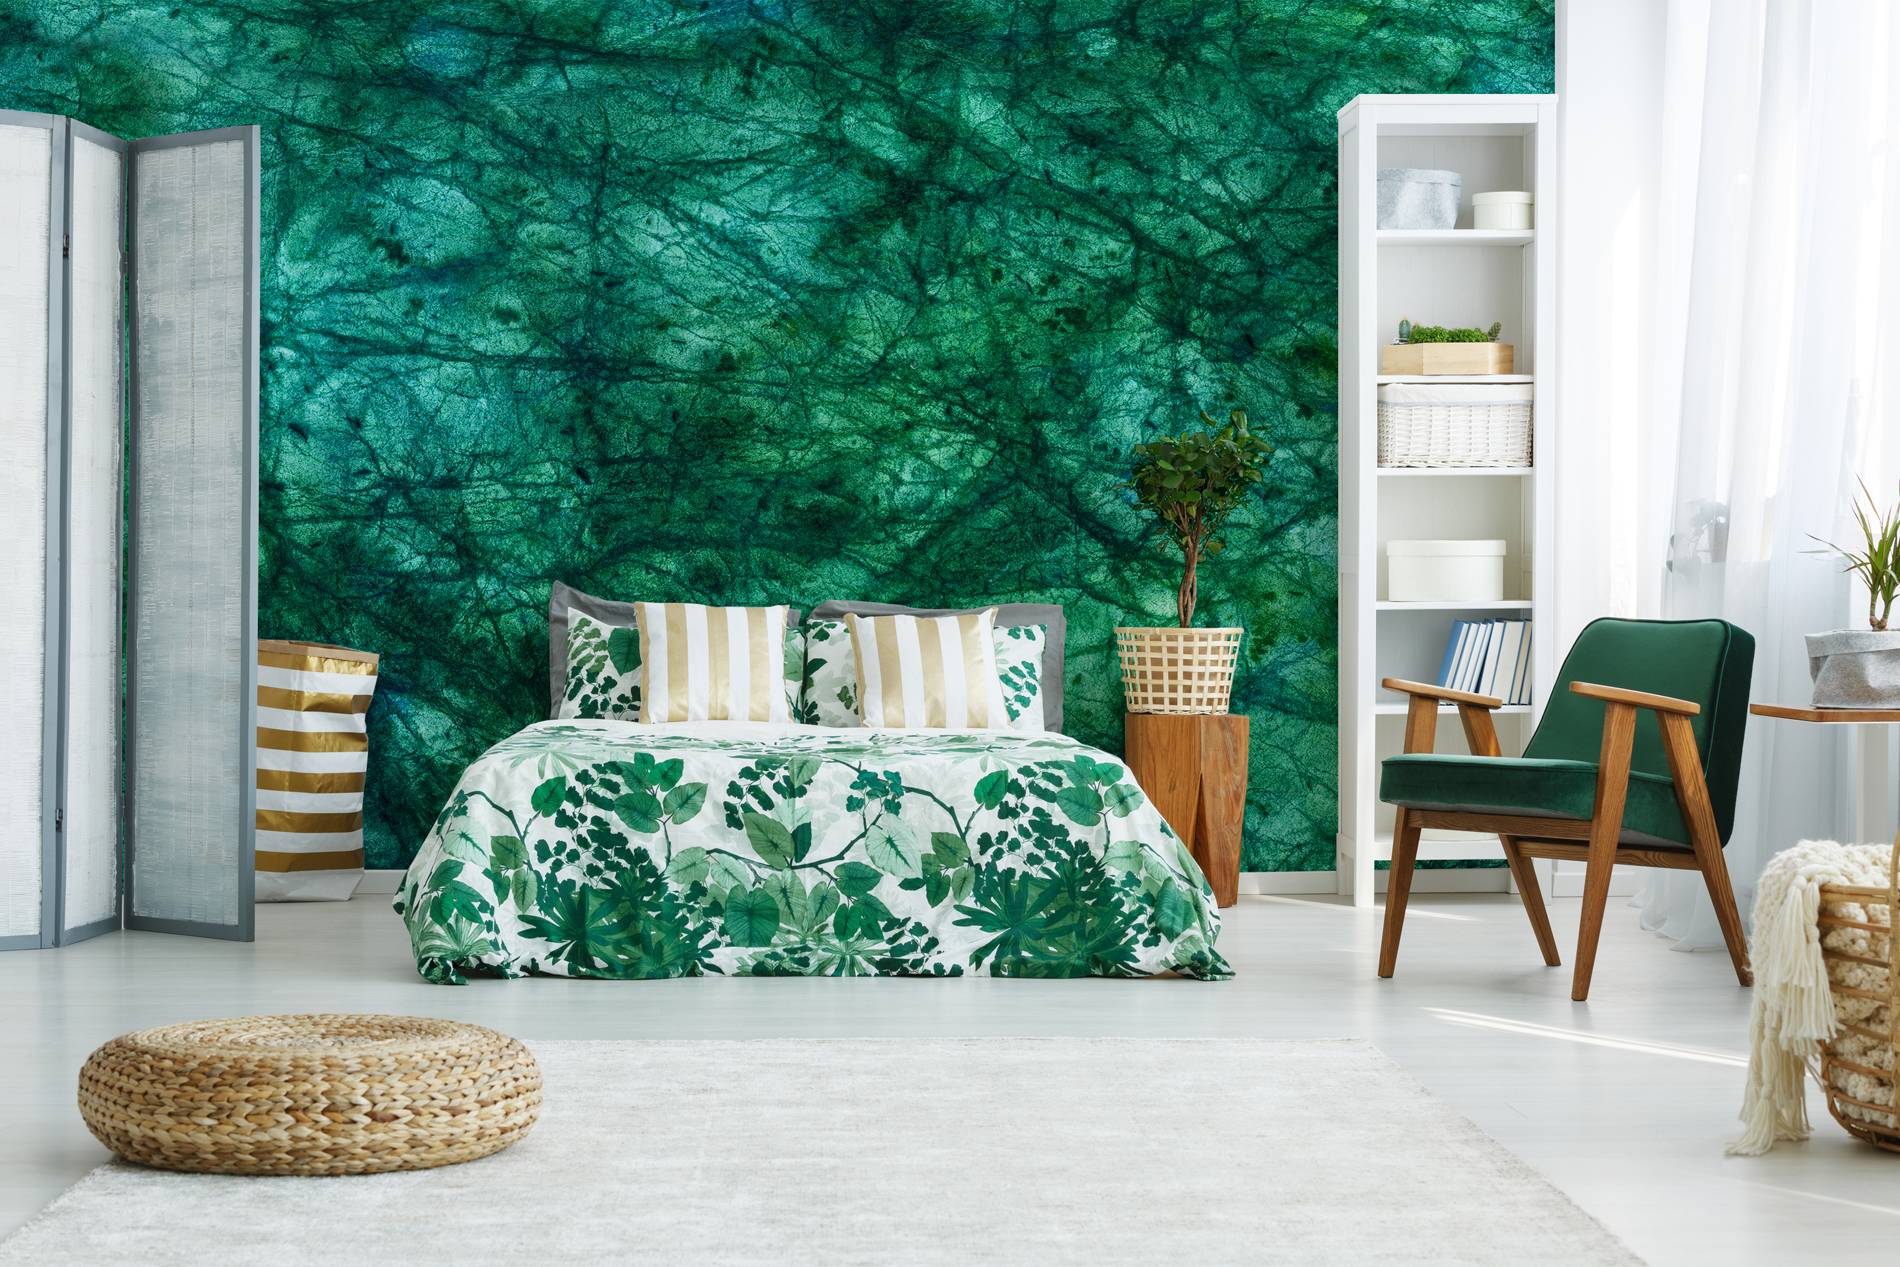 Leaf structure • Contemporary - Bedroom - Nature - Wall Murals